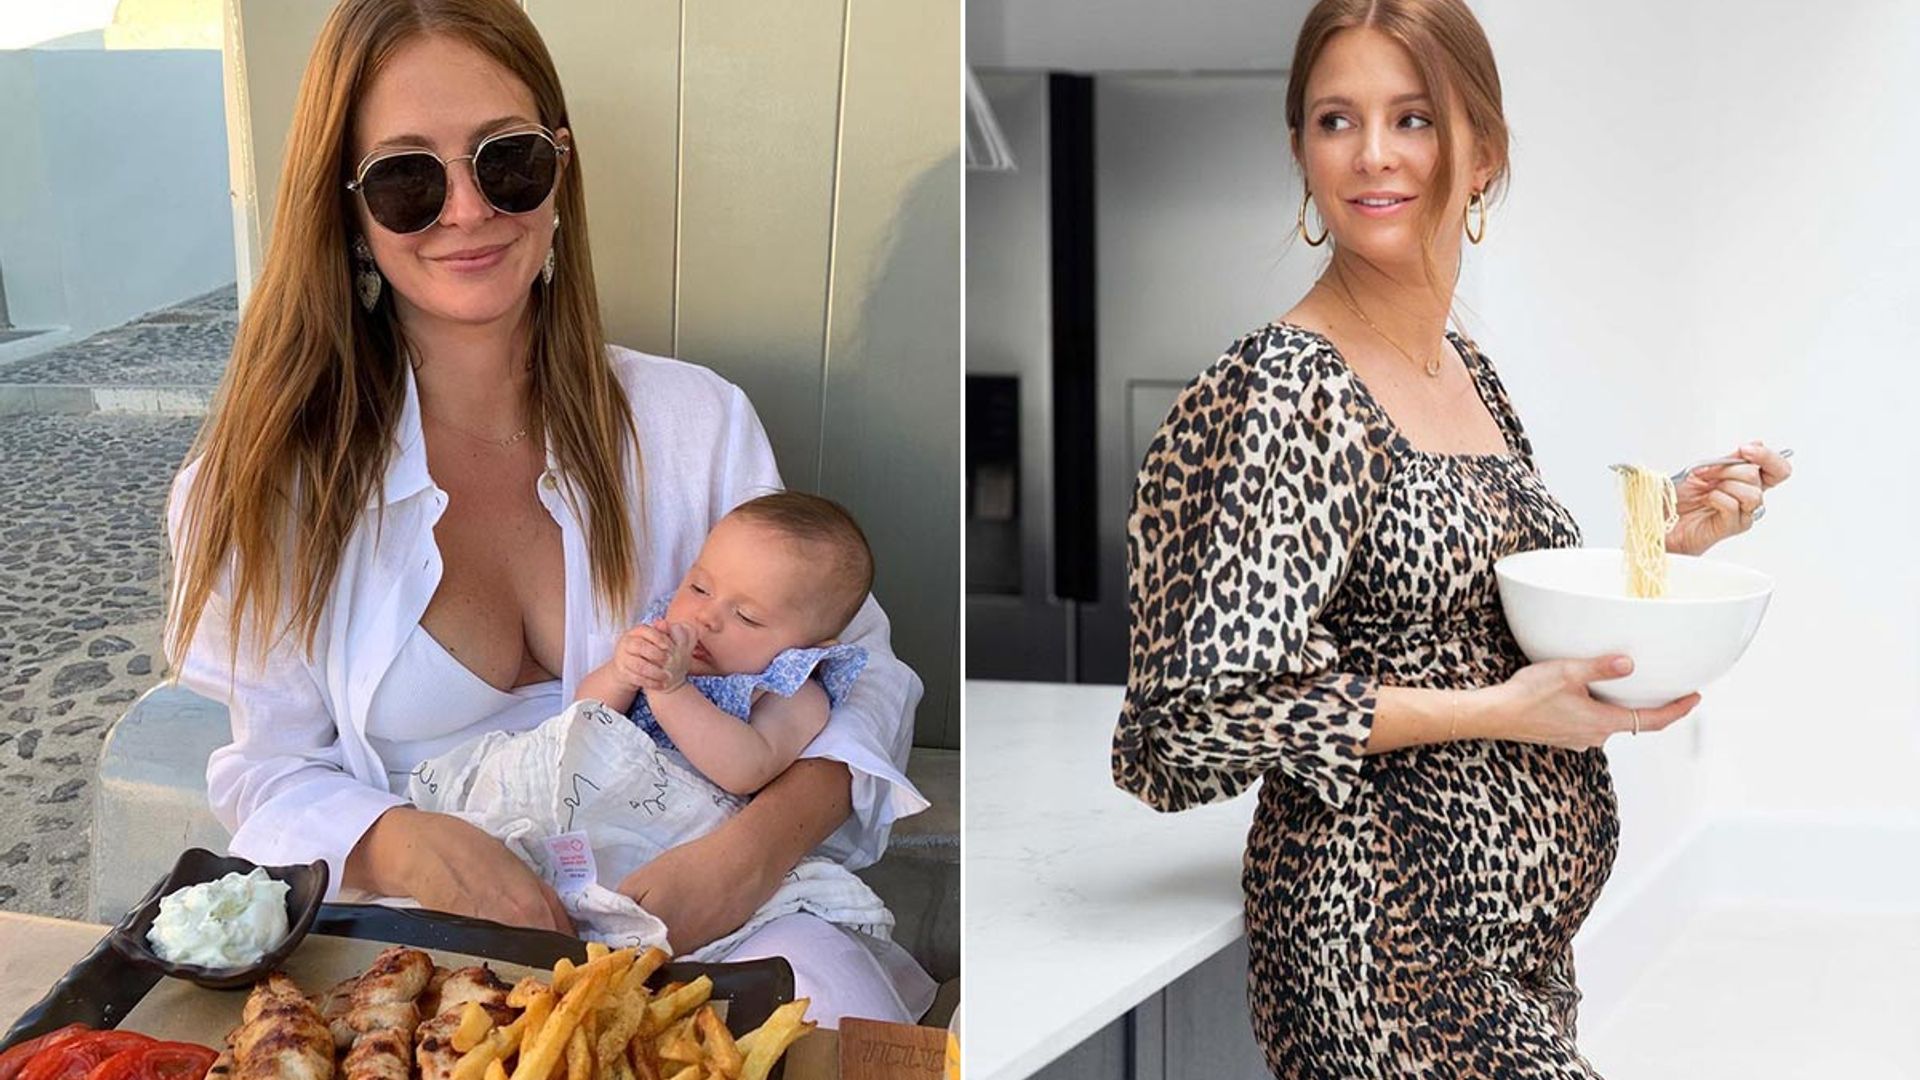 Millie Mackintosh's pregnancy and post-baby diet may surprise you